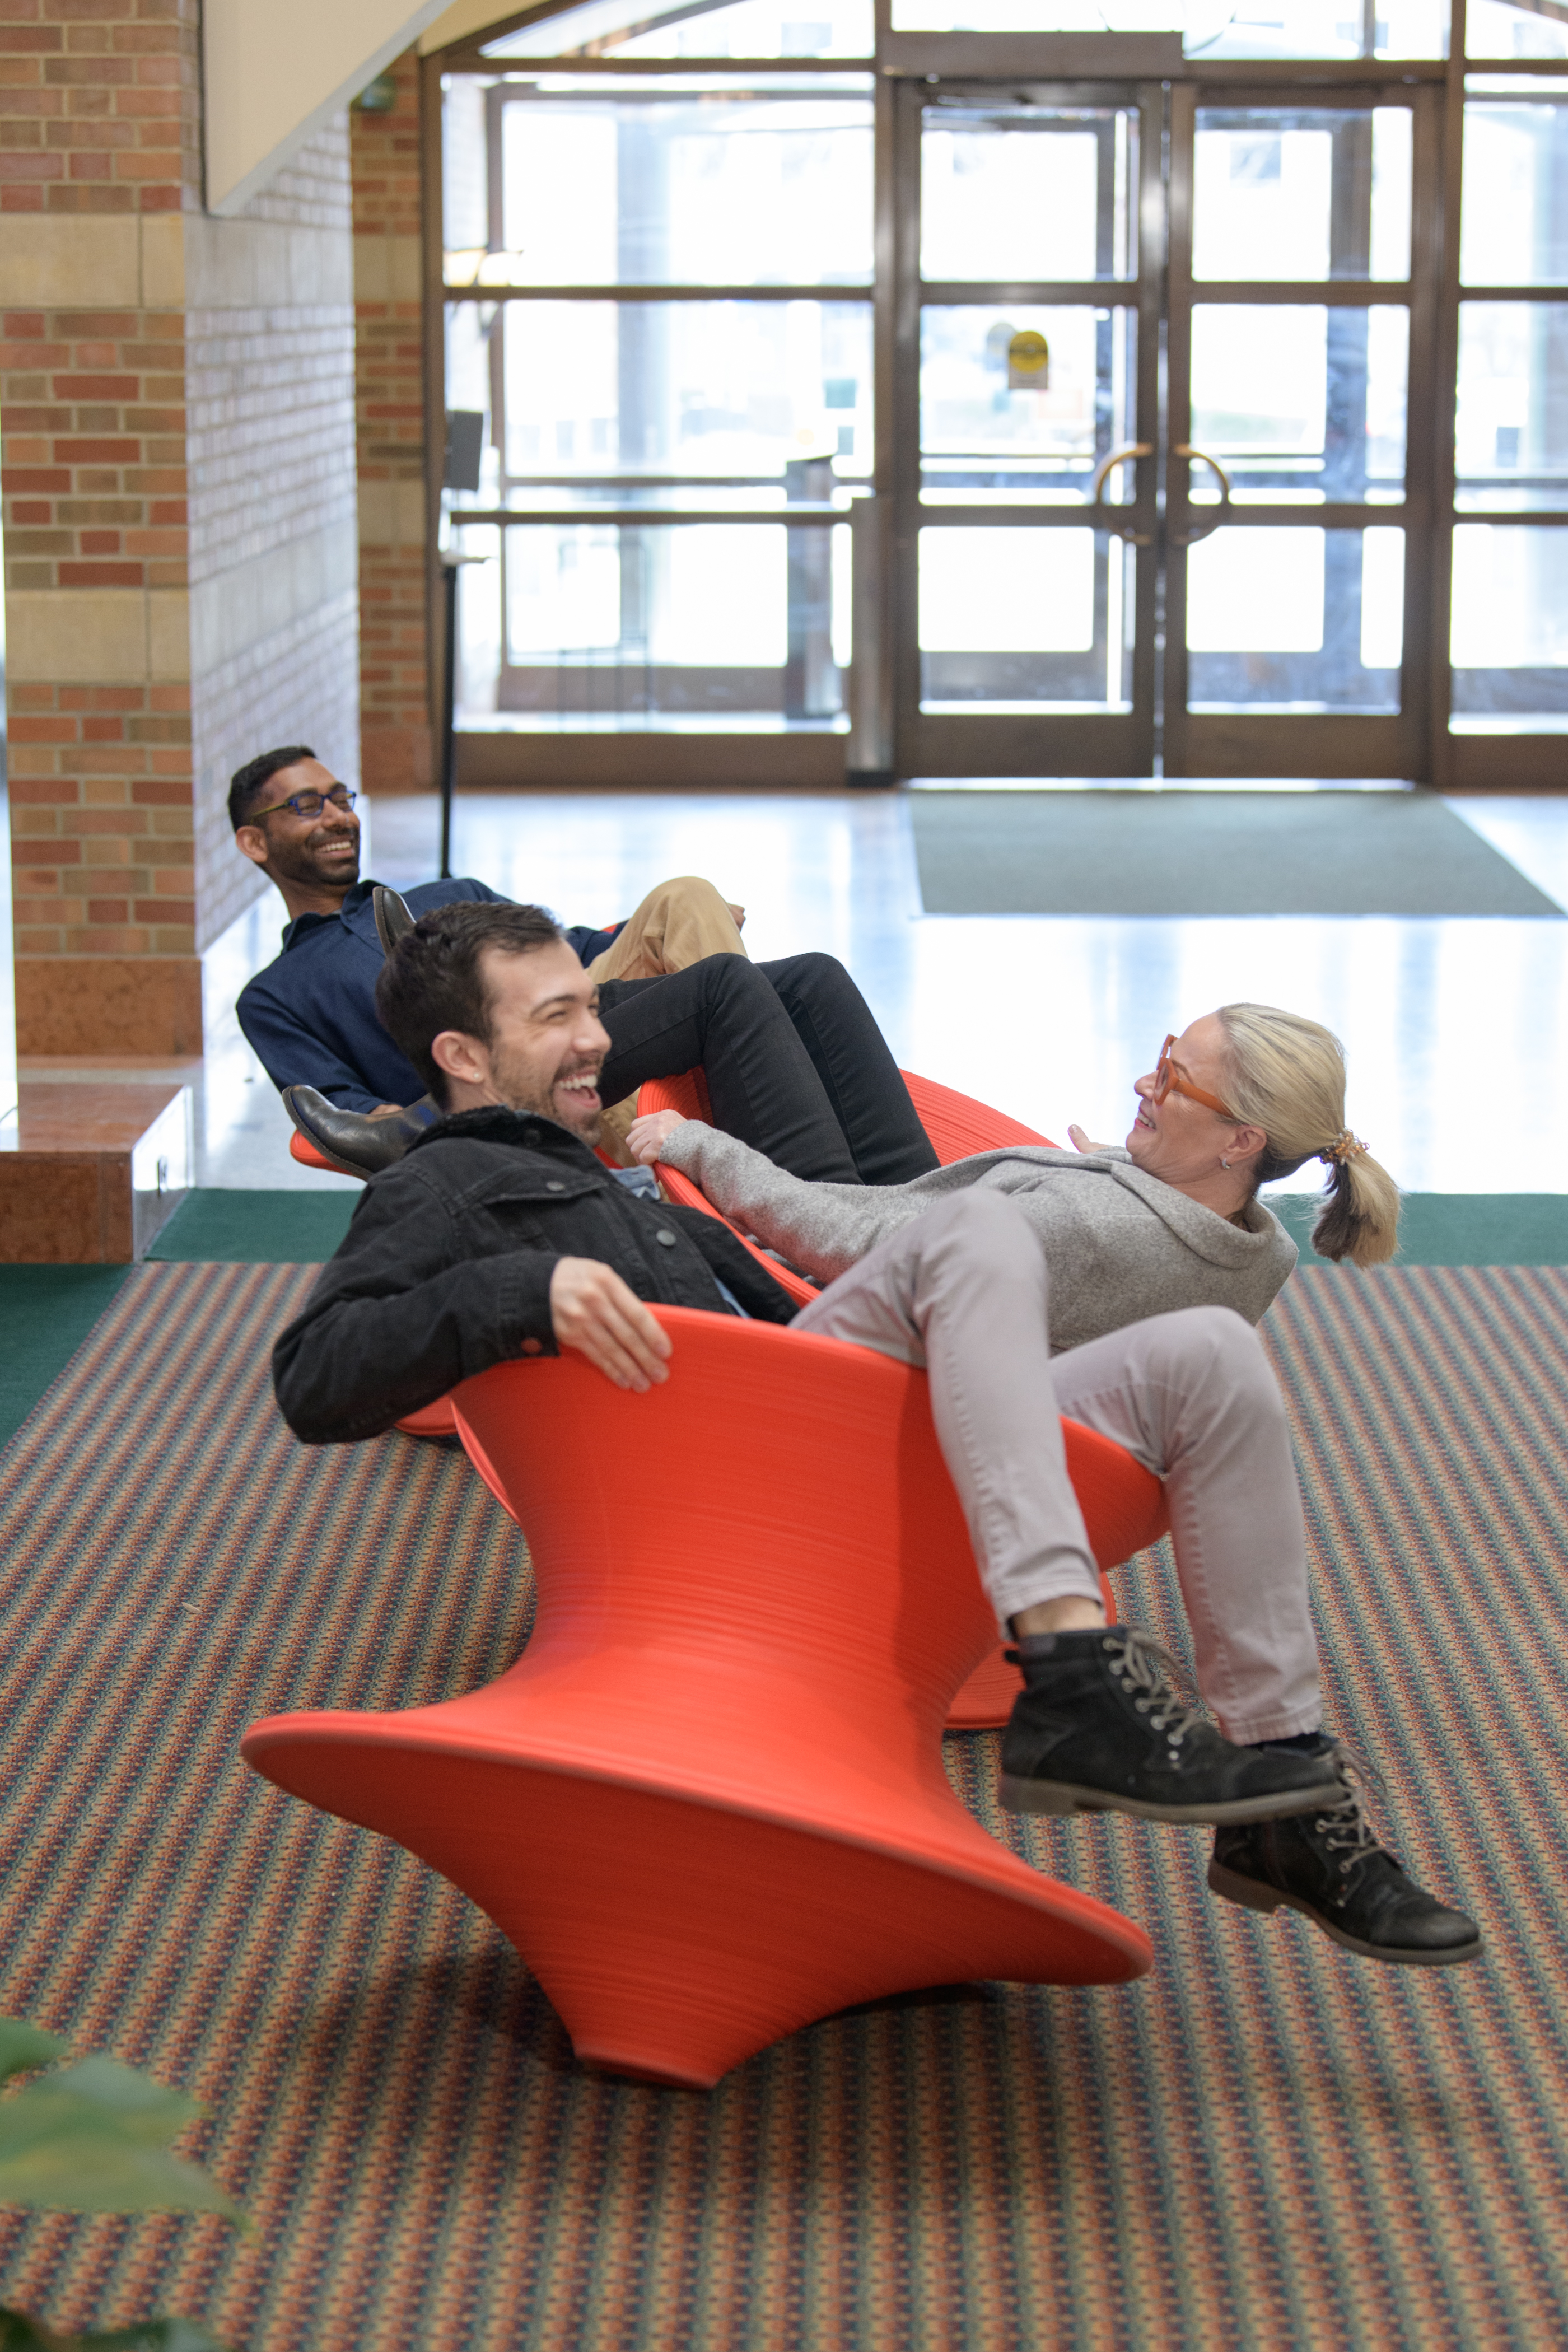 Three individuals, including Deana McDonagh, joyfully spin on the Spun Chairs in Beckman's remodeled atrium.